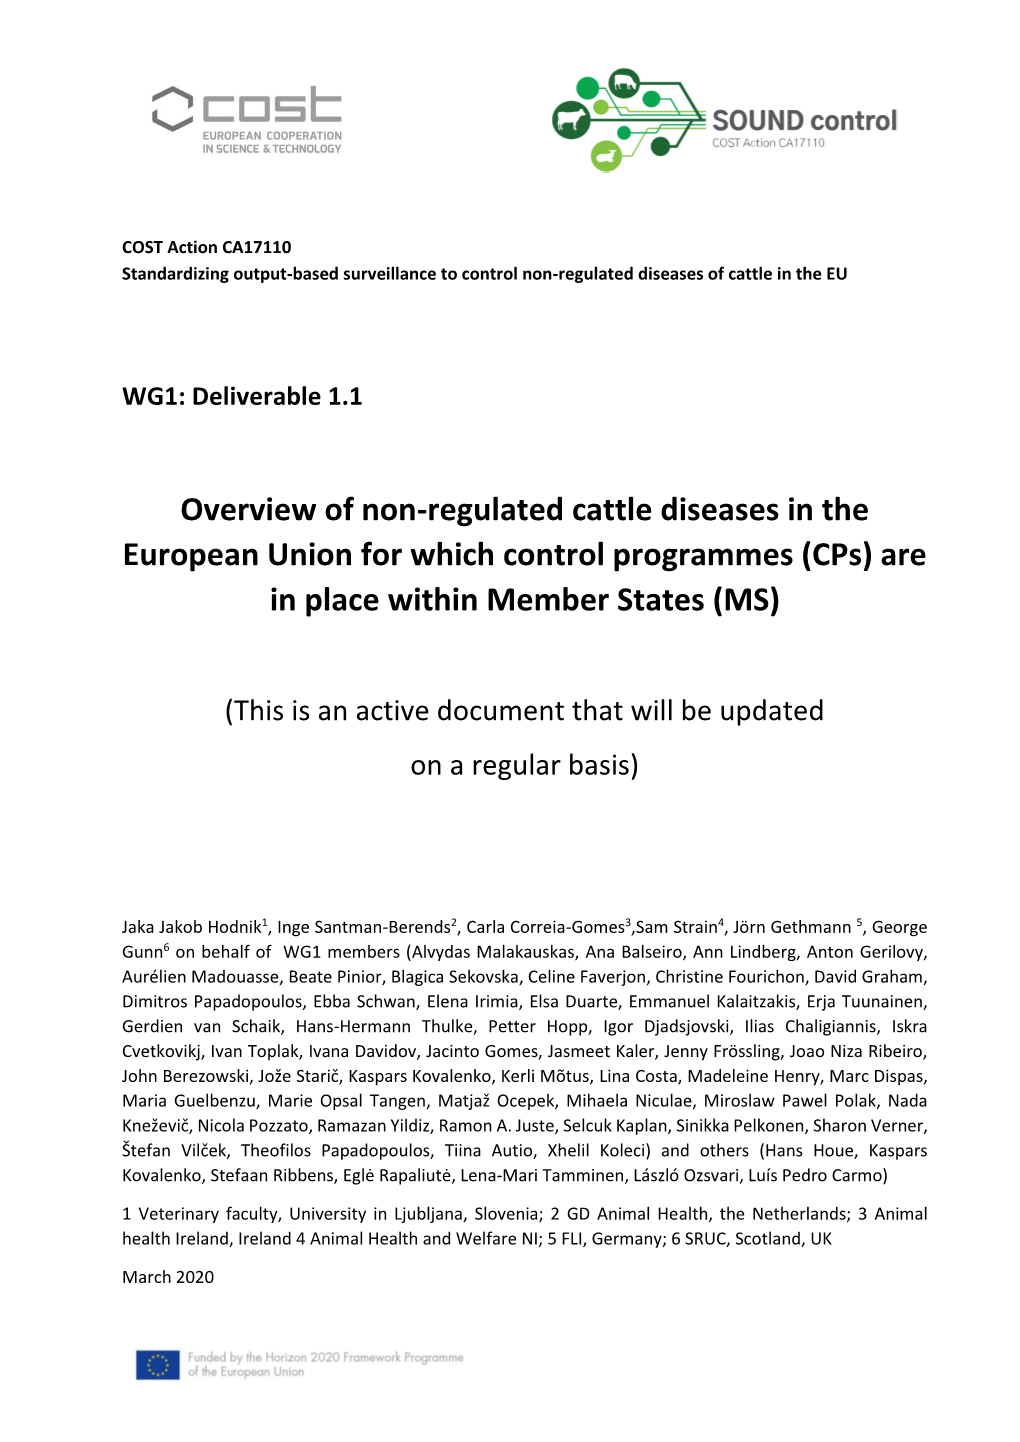 Deliverable 1.1. Overview of Non-Regulated Cattle Diseases in the EU for Which Cps Are In